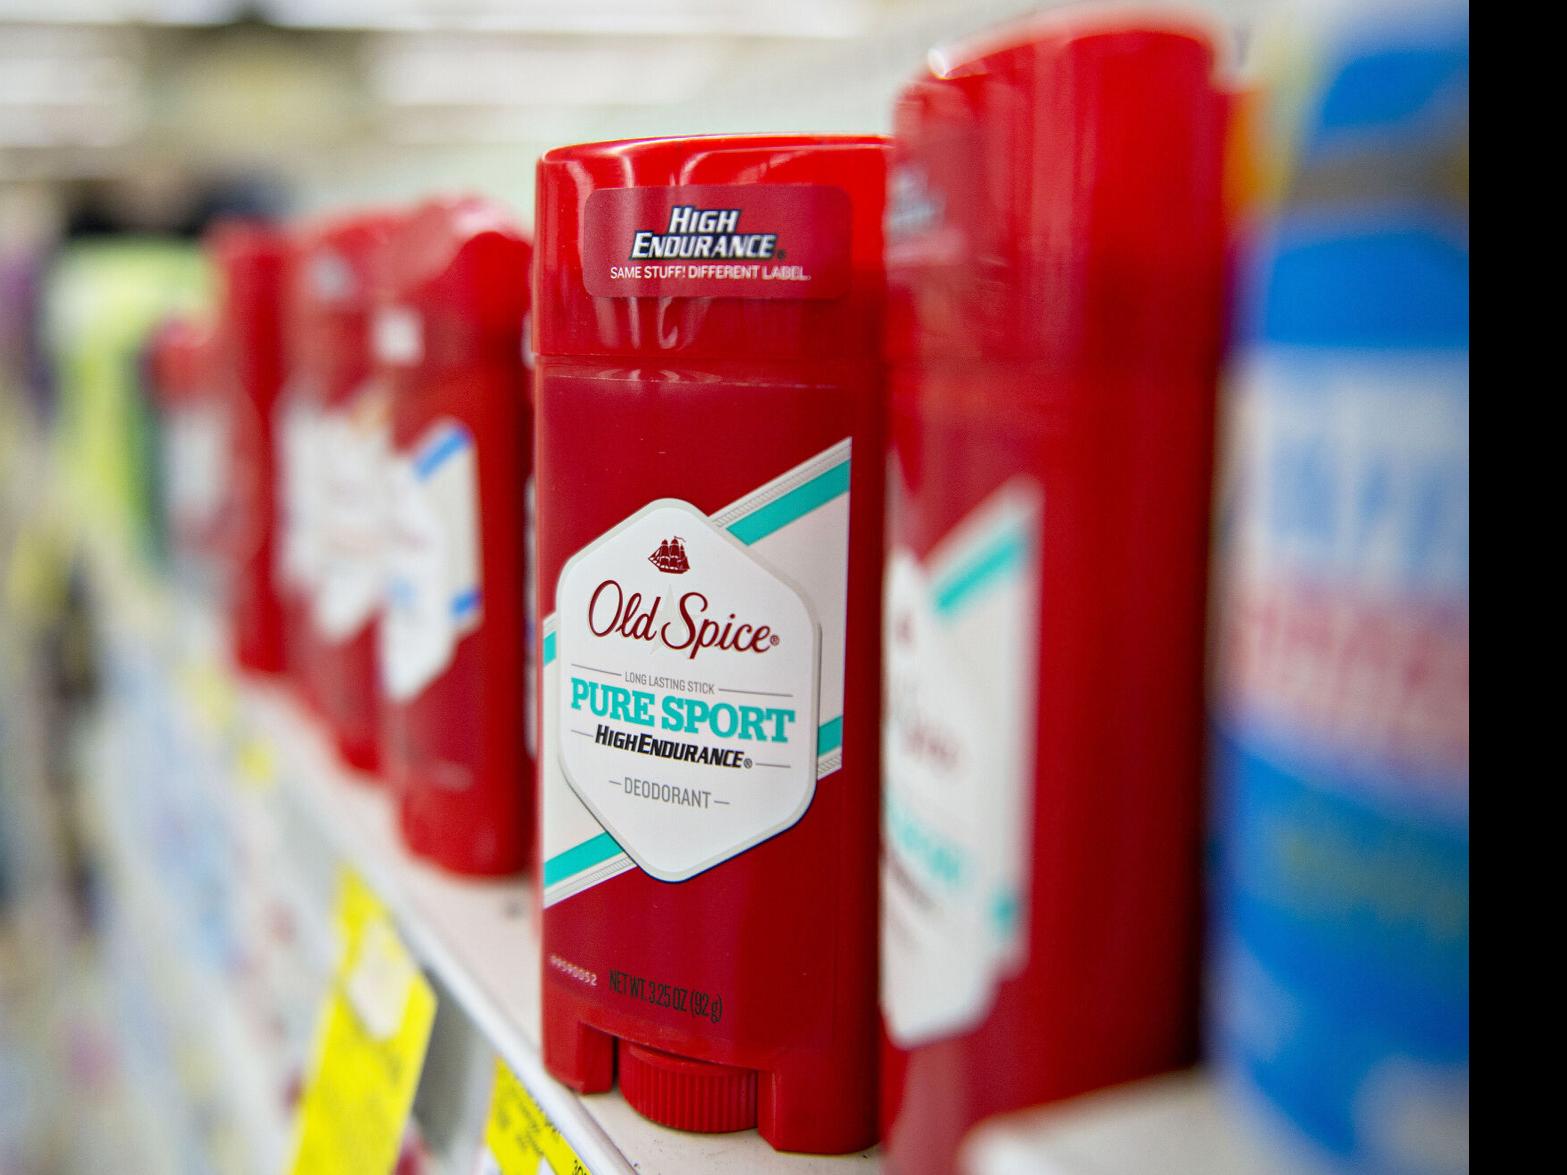 Some Old and Secret deodorants recalled after is detected | Commerce | wkow.com